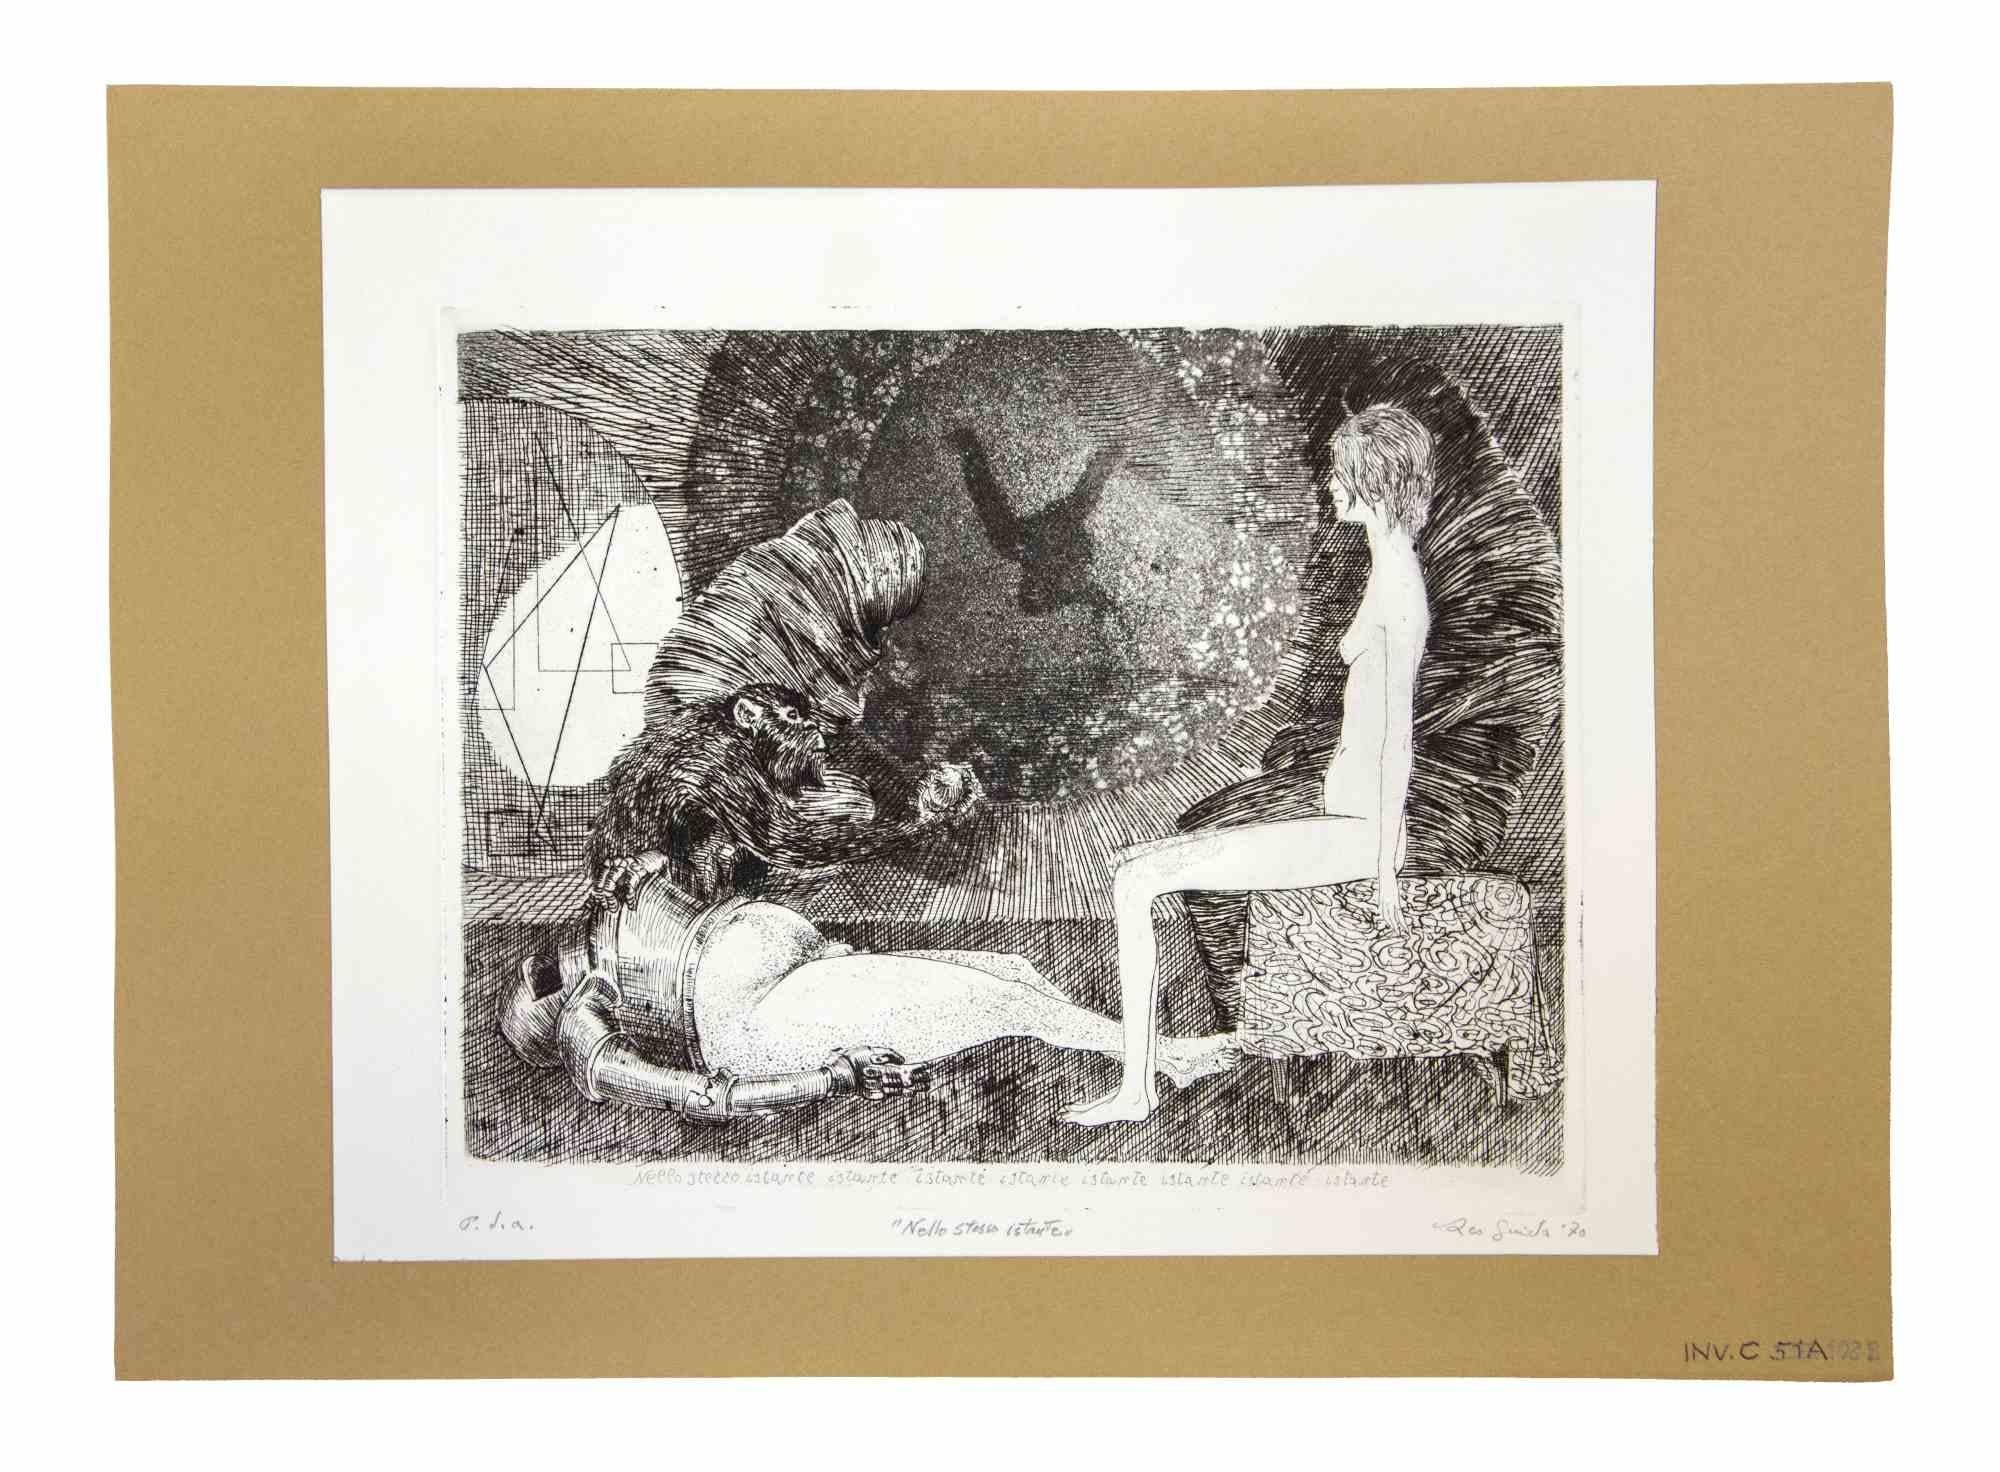 At the Same Time is an original etching and aquatint realized by Leo Guida in 1970s.

Good condition.

Mounted on a white cardboard passpartout (35x50).

Leo Guida  (1992 - 2017). Sensitive to current issues, artistic movements and historical